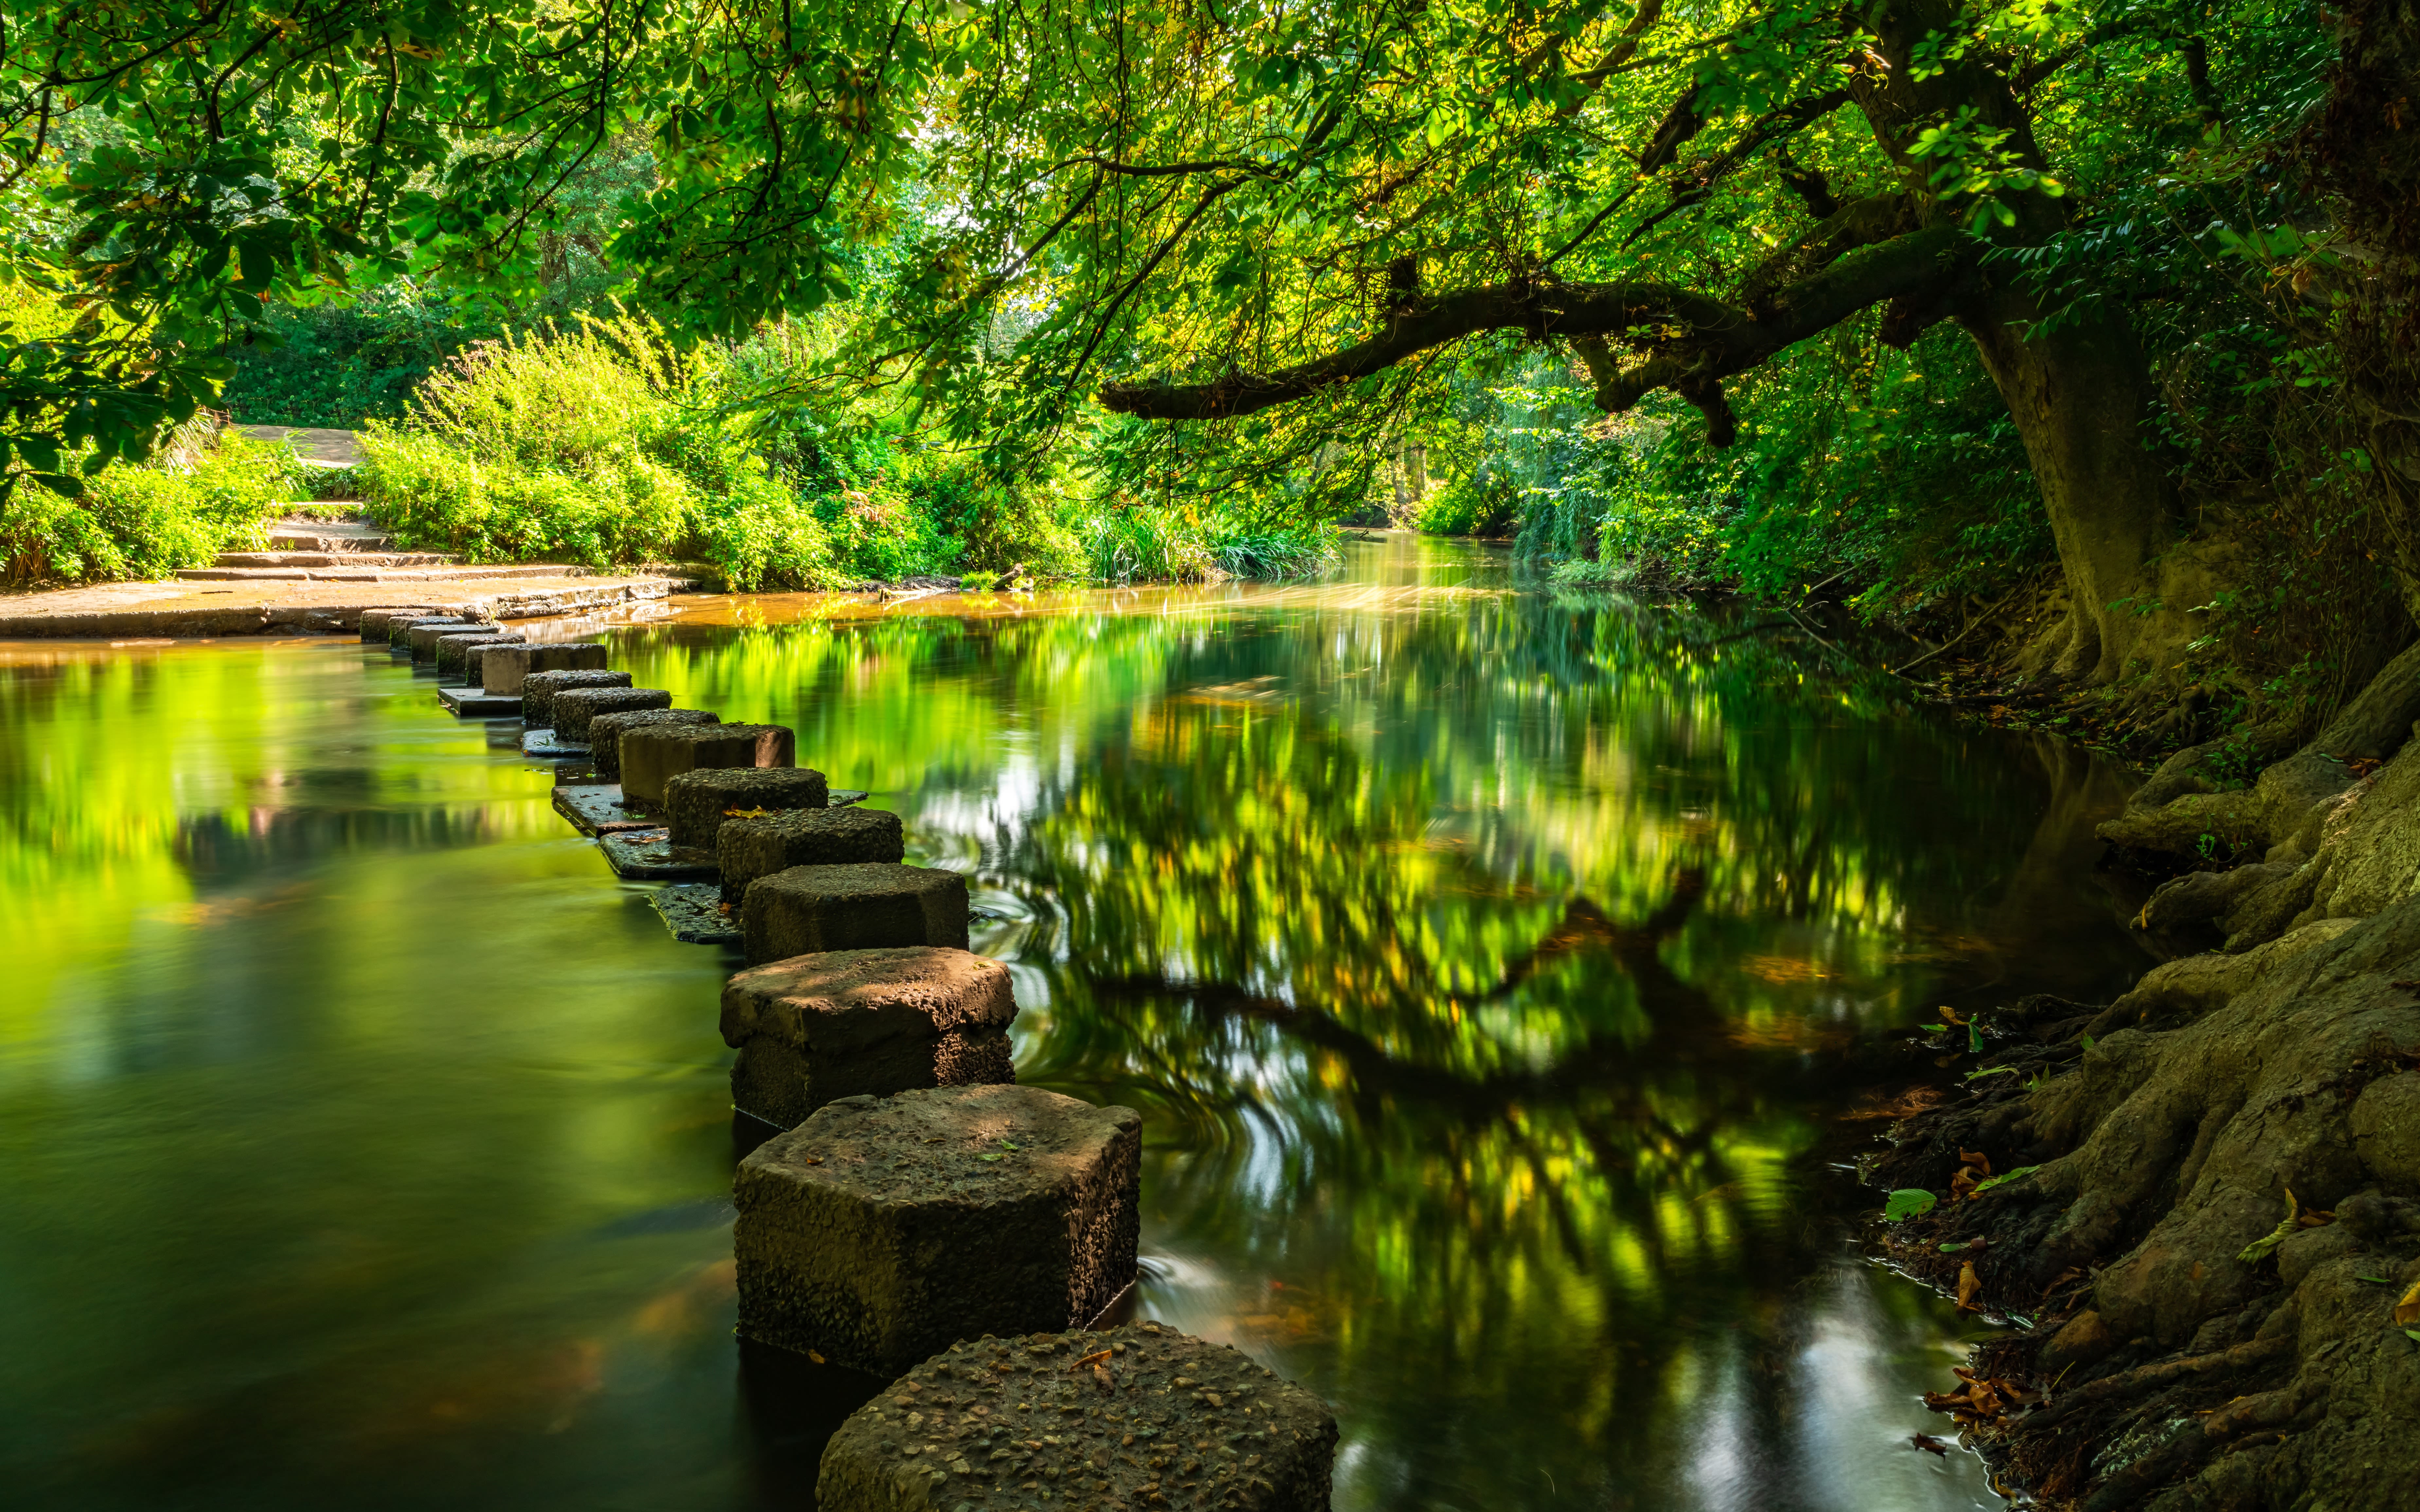 An image of the Stepping Stones in Surrey, UK